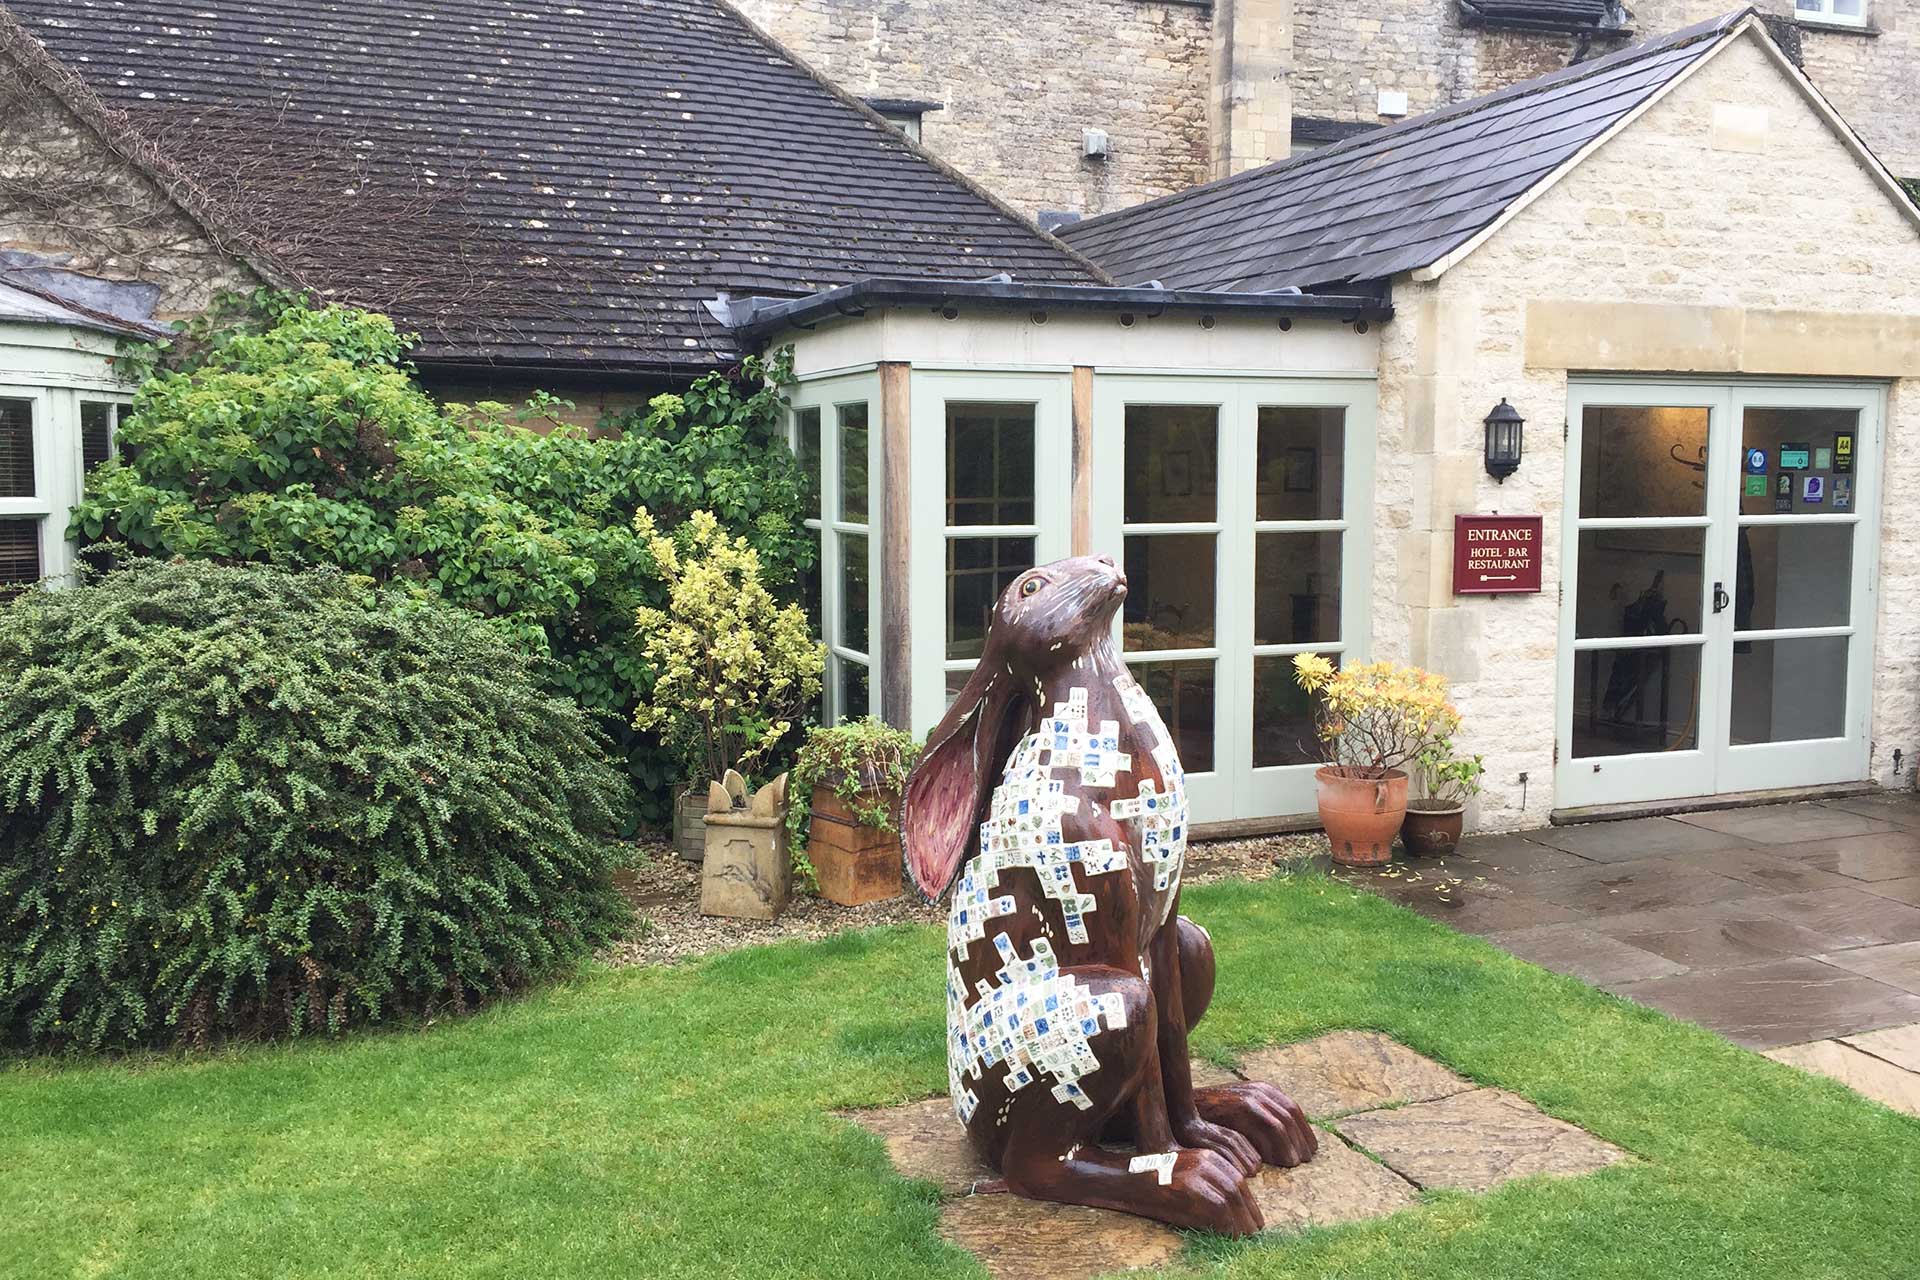 Cotswold Hare Trail - Hare at The Corinium Hotel in Cirencester